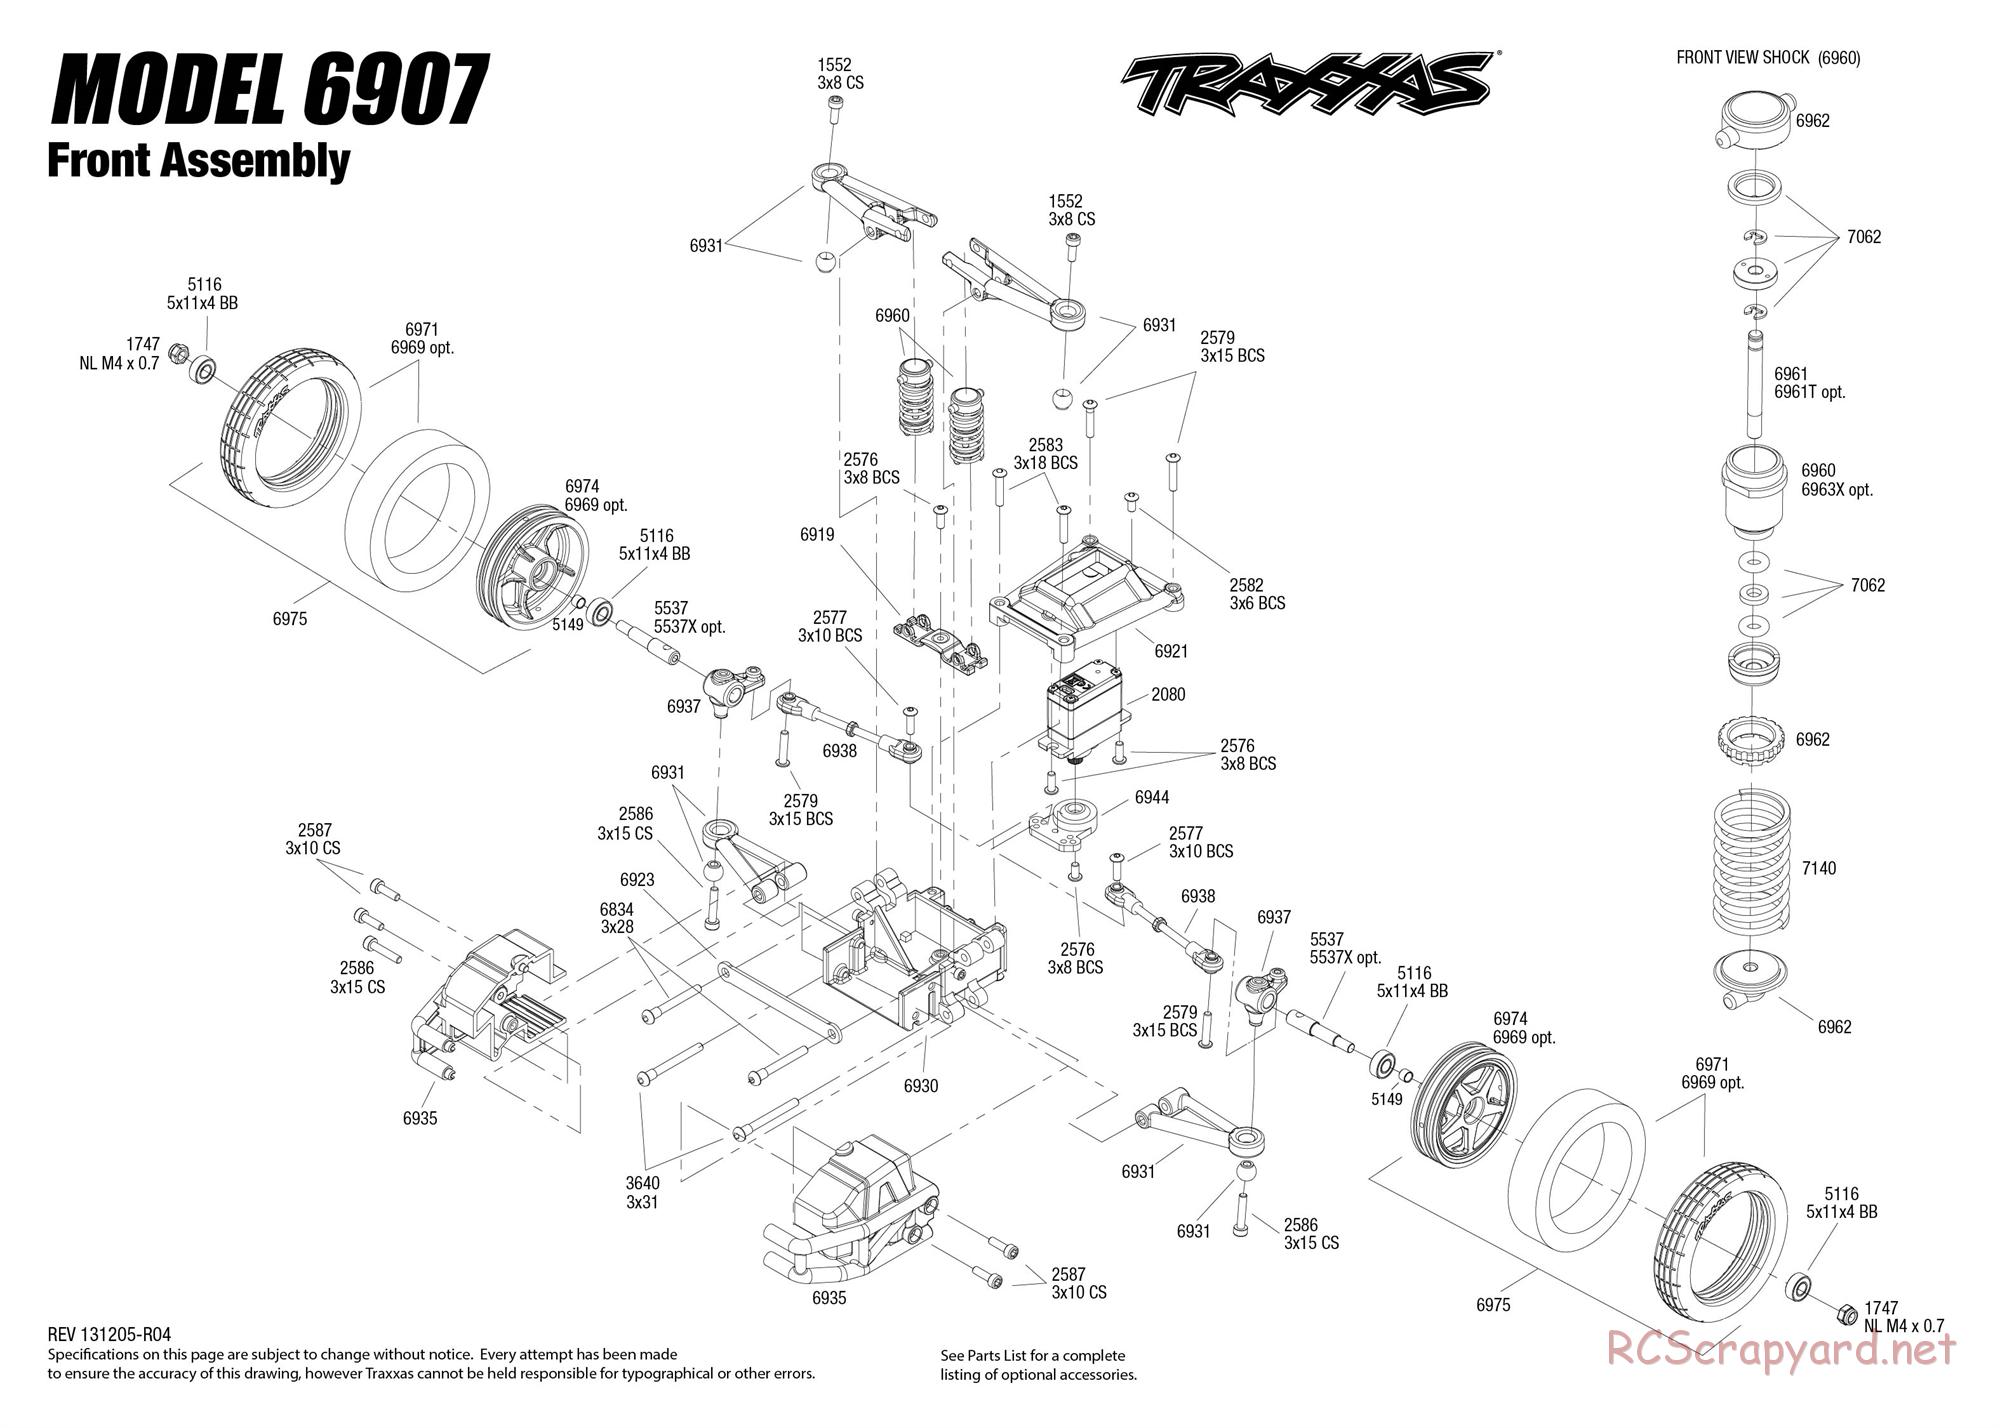 Traxxas - Funny Car (2012) - Exploded Views - Page 2